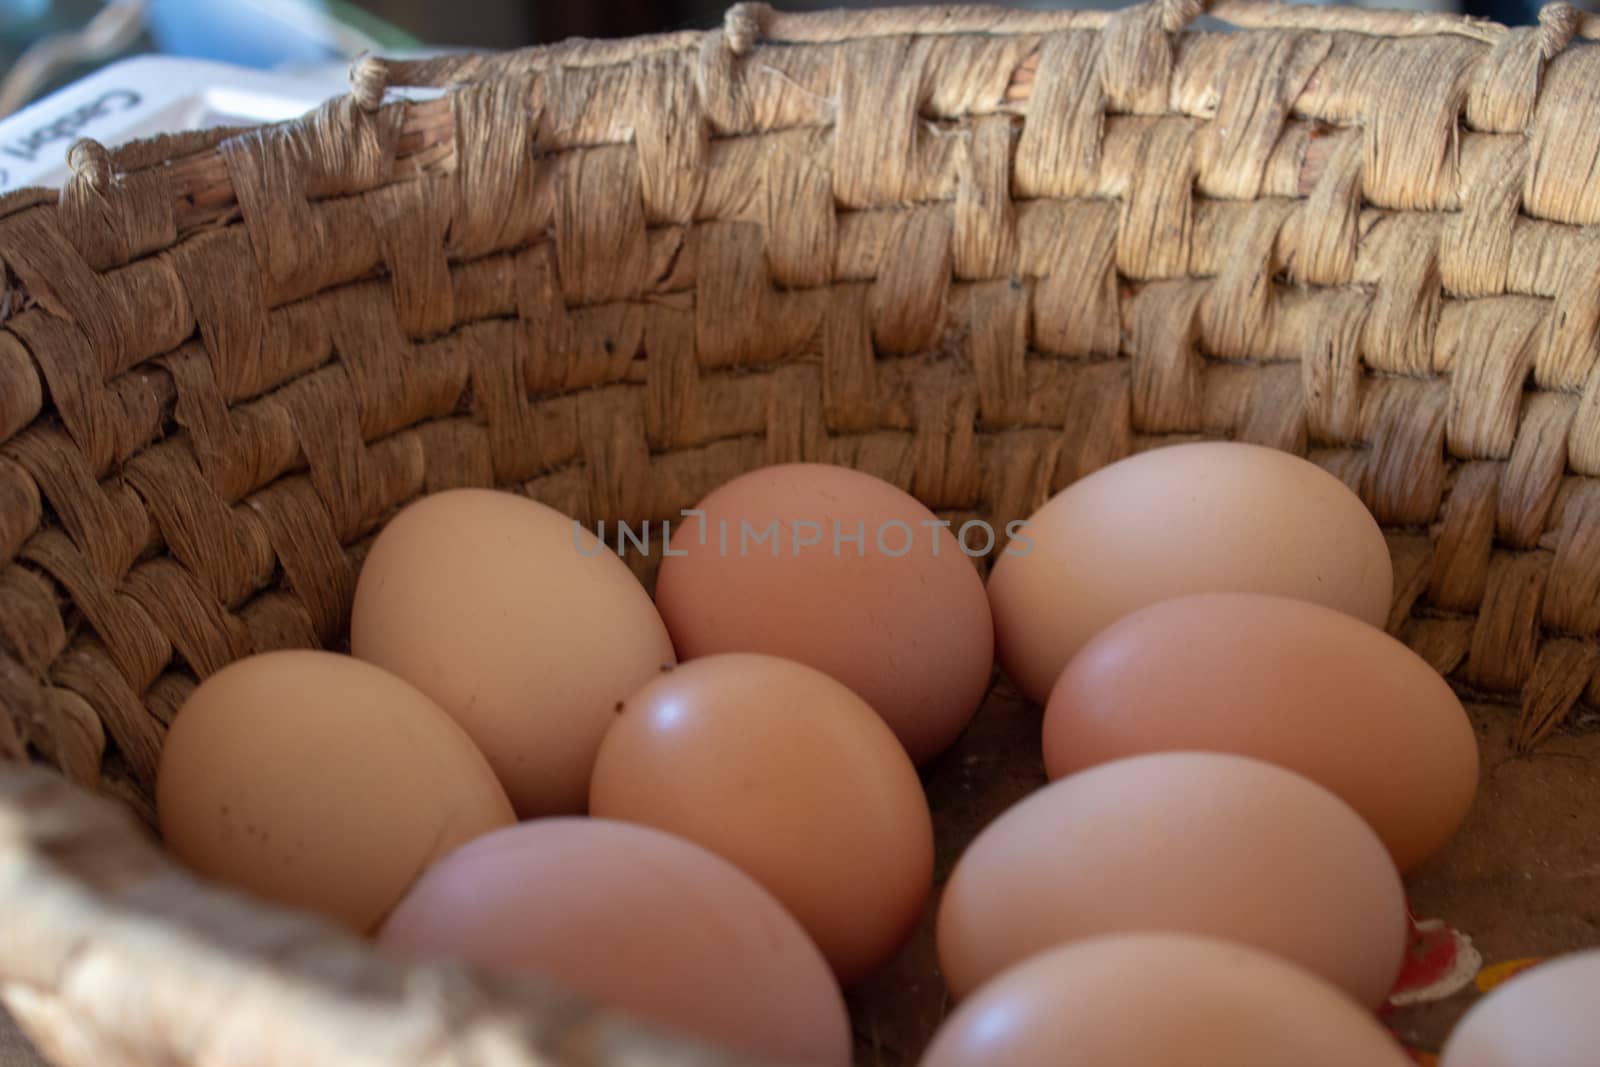 A hay basket full of red eggs by etcho